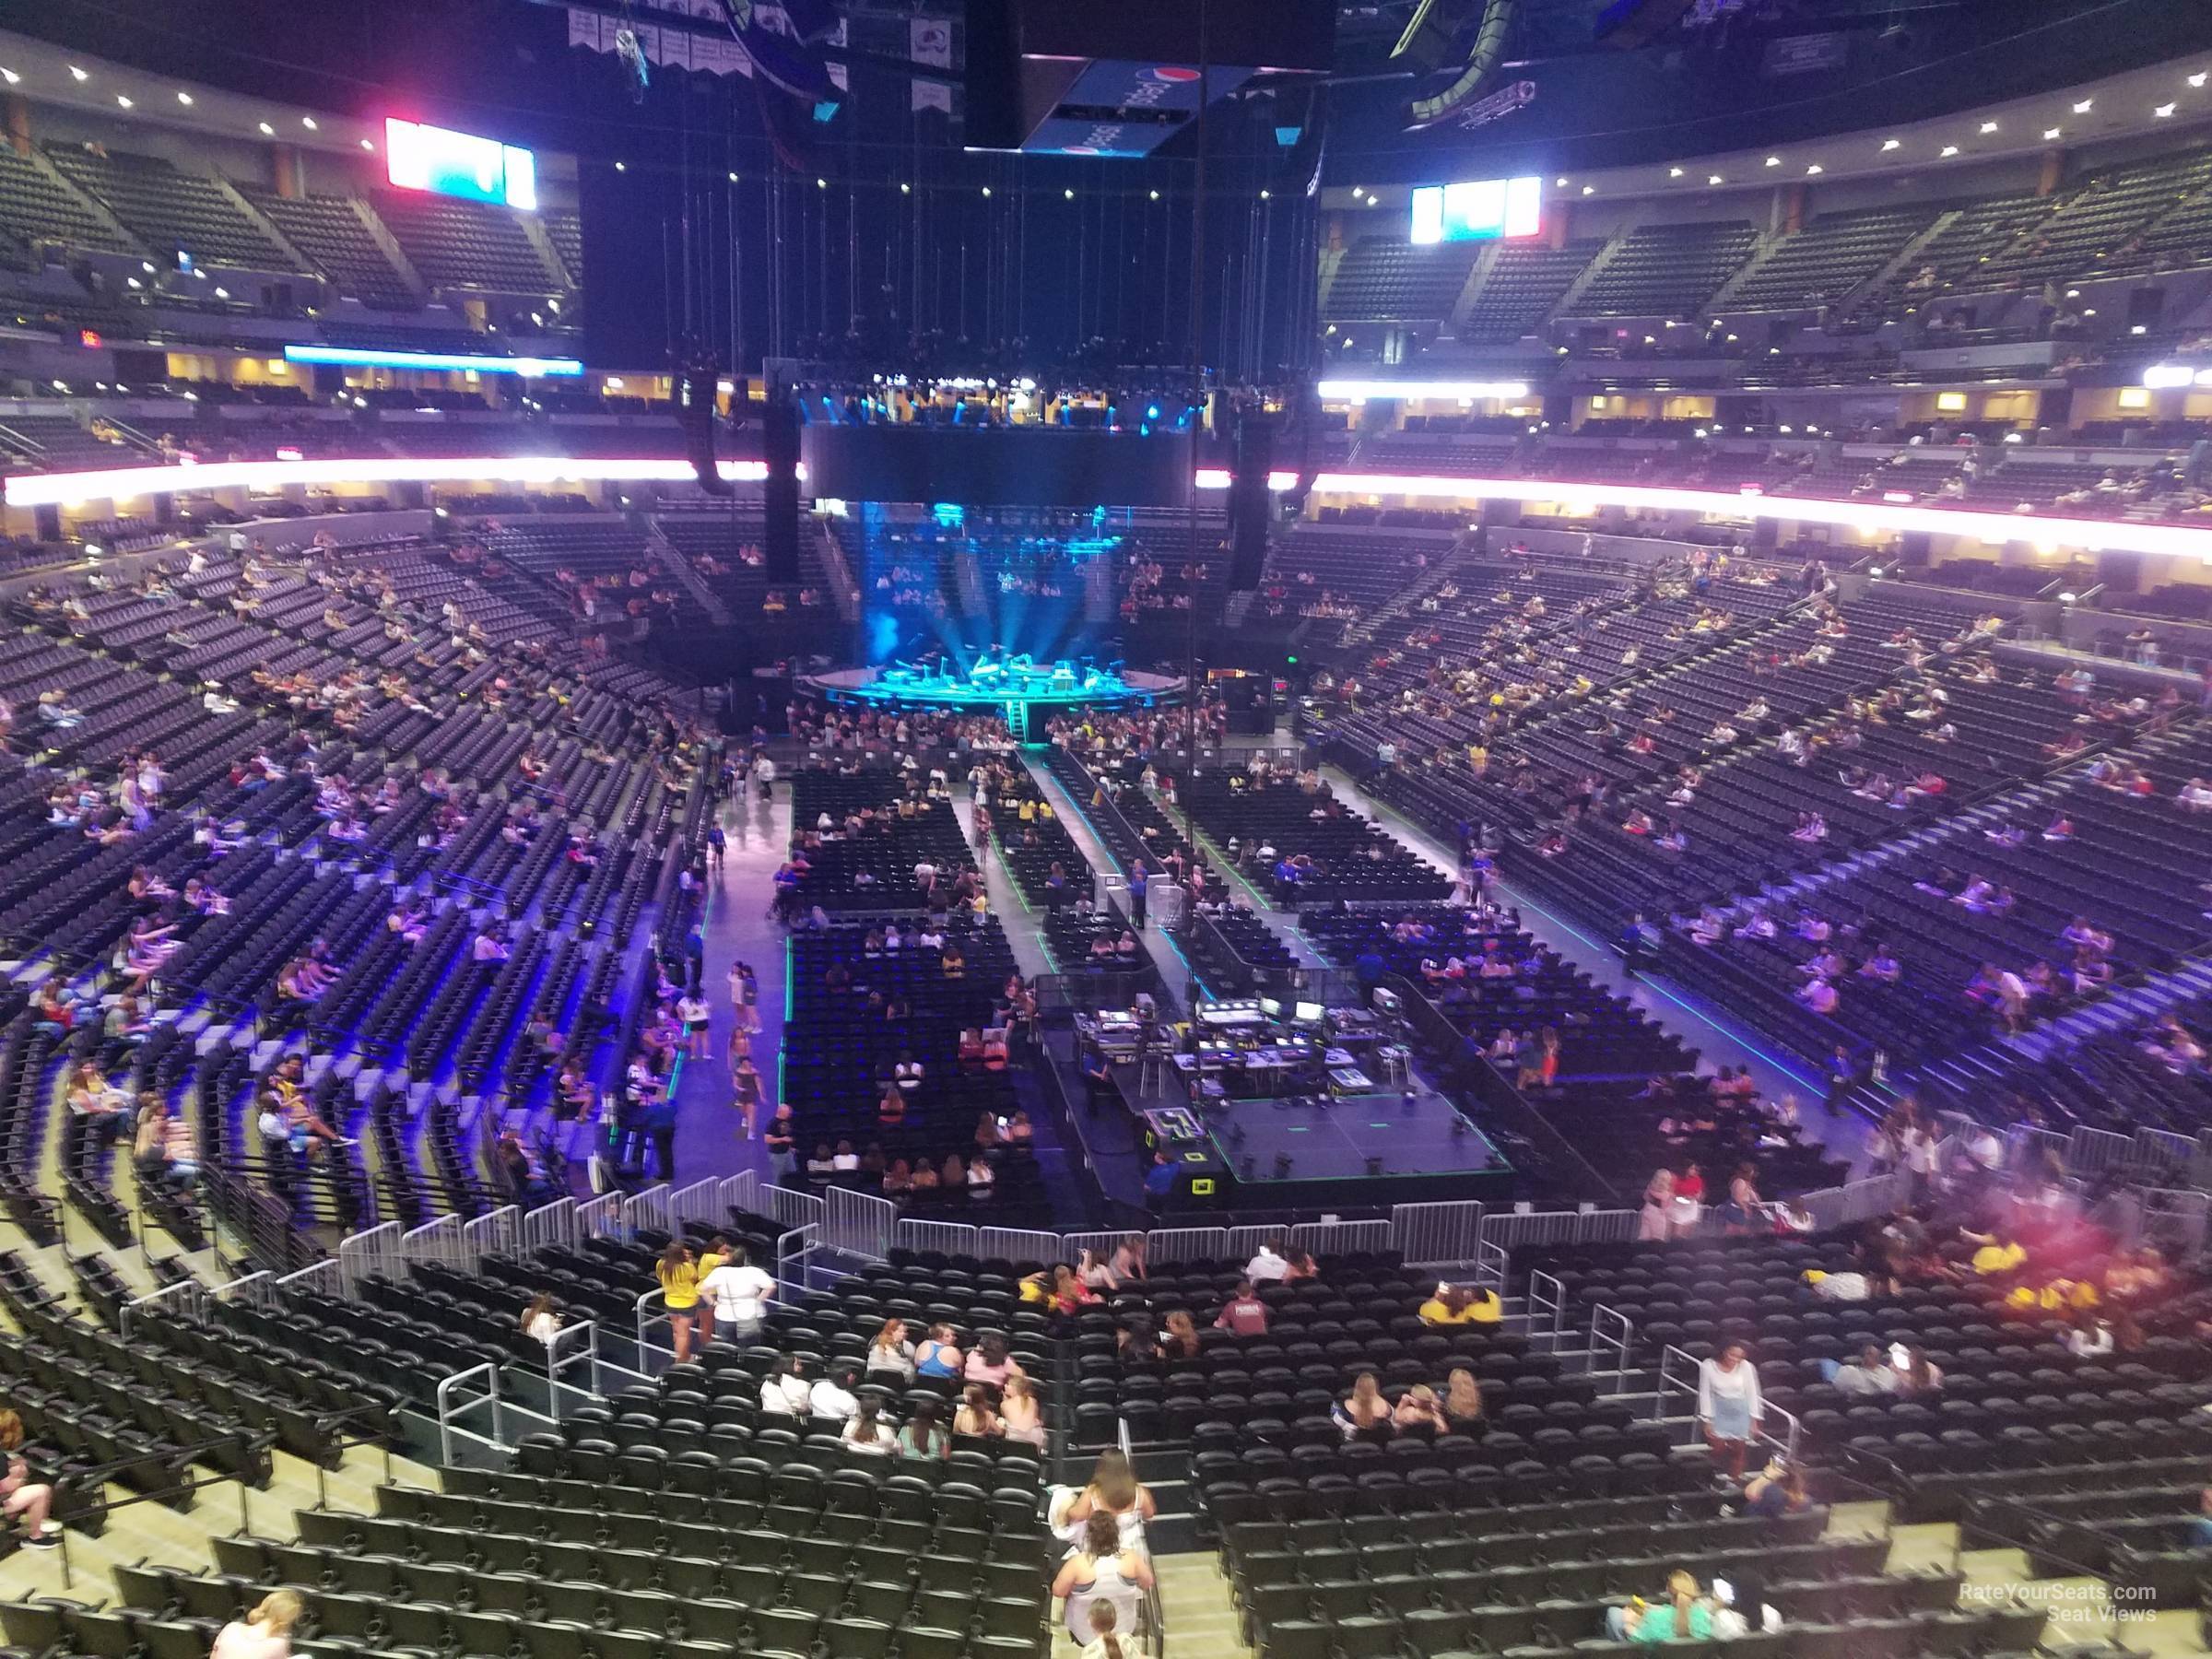 Section 218 at Pepsi Center for Concerts